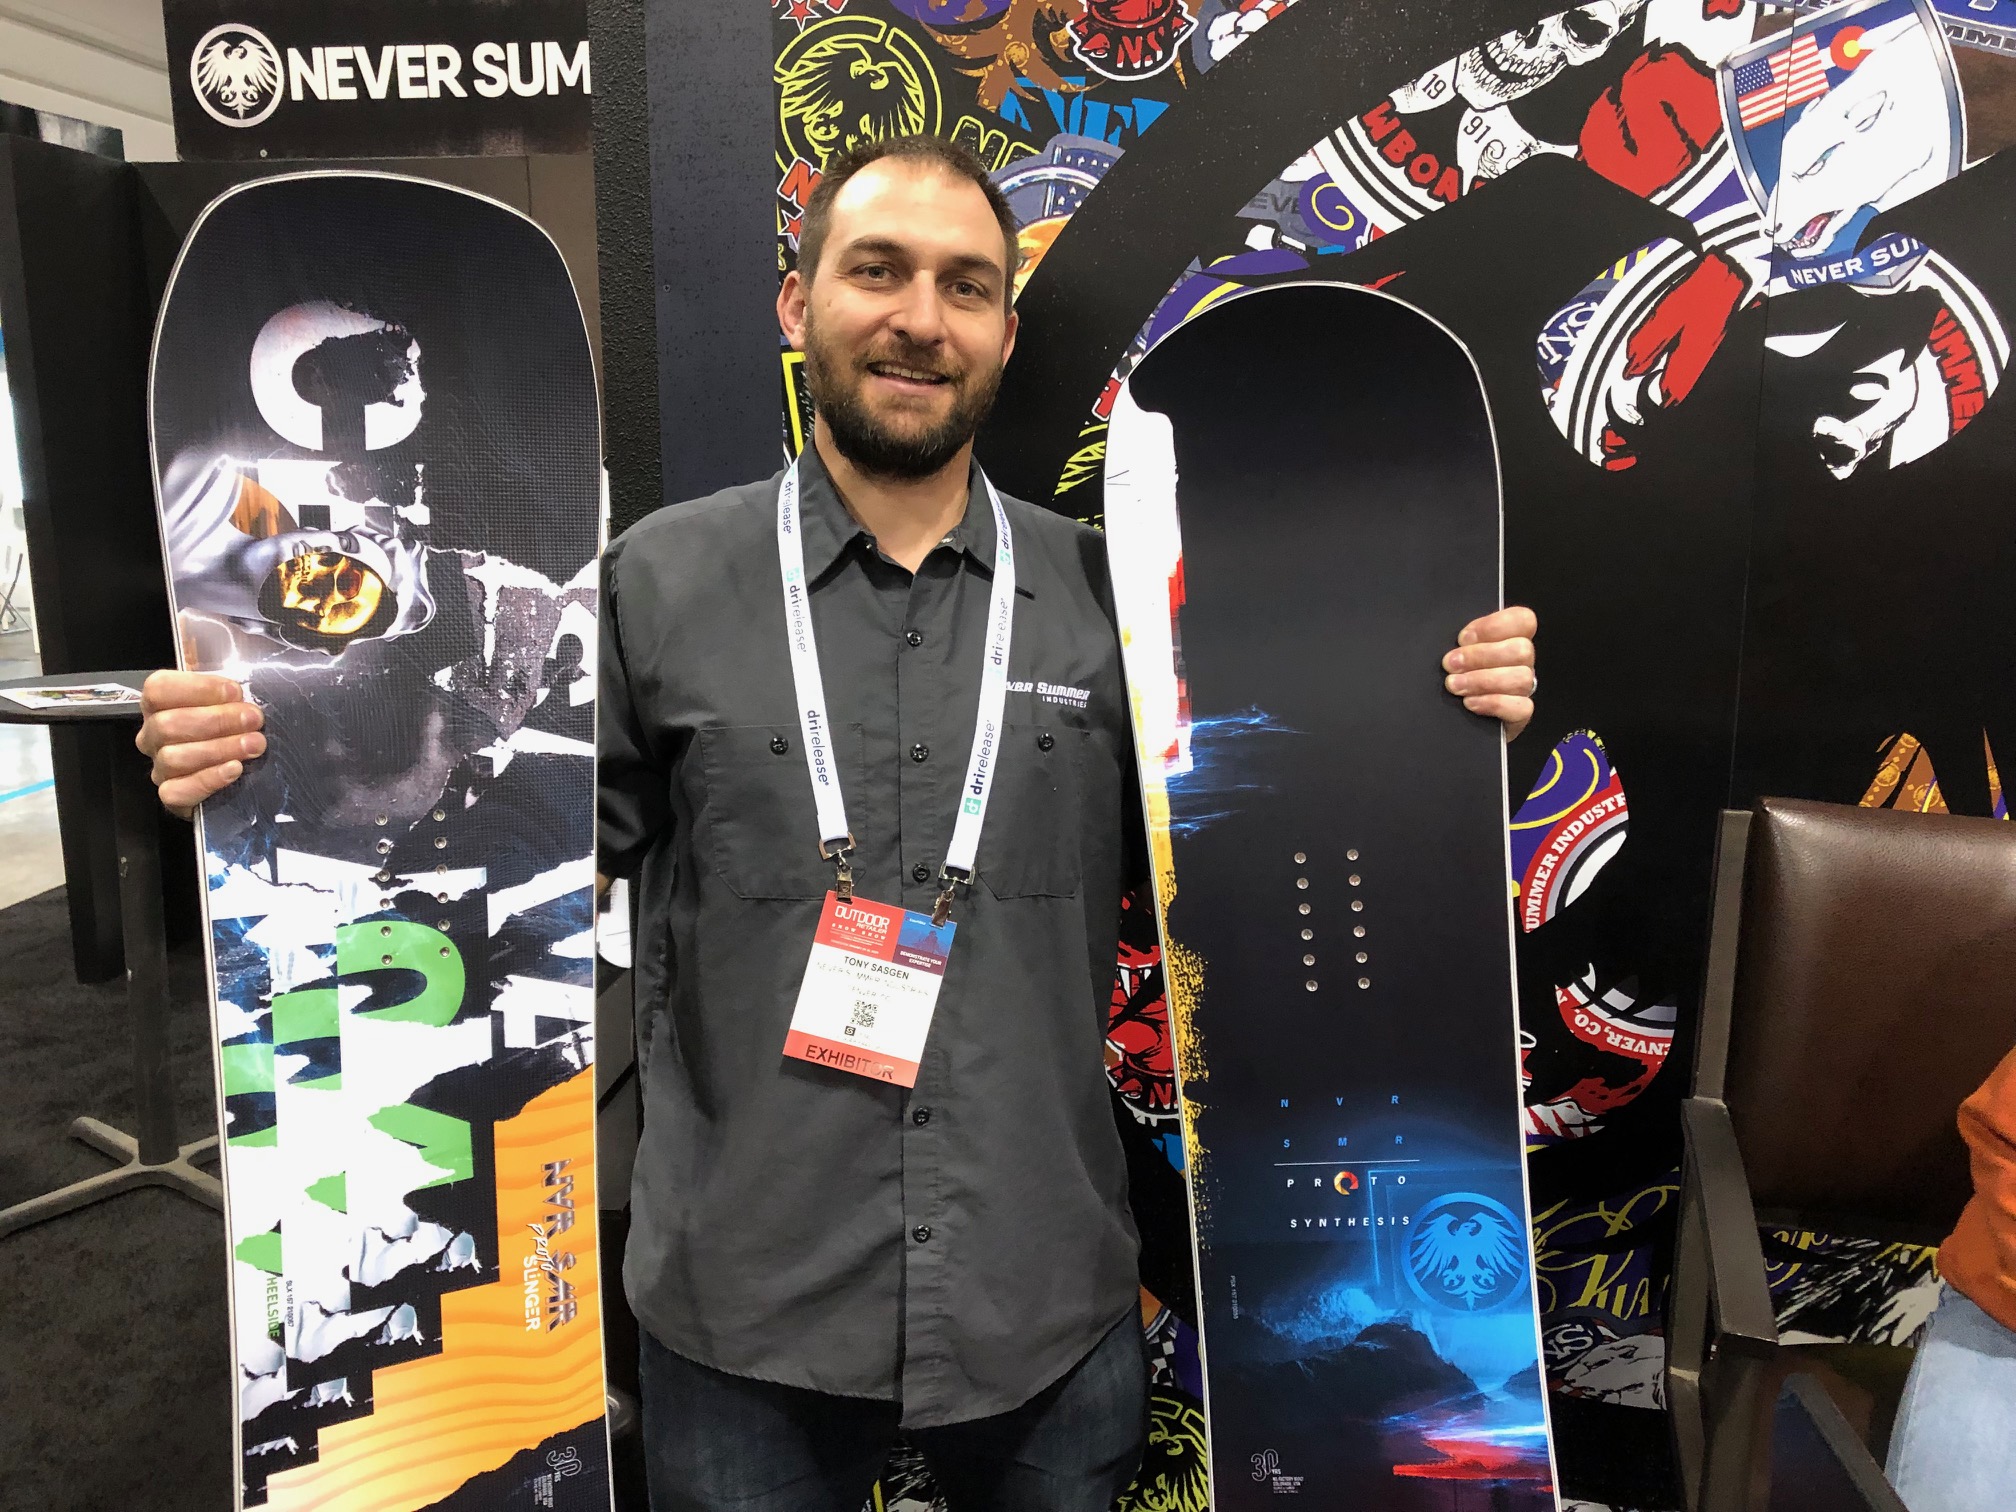 At the 2020 Outdoor Retailer Snow Show, Never Summer's Tony Sasgen shows off the company's WooBoo and Proto Slinger Freestyle AsymTwin snowboards